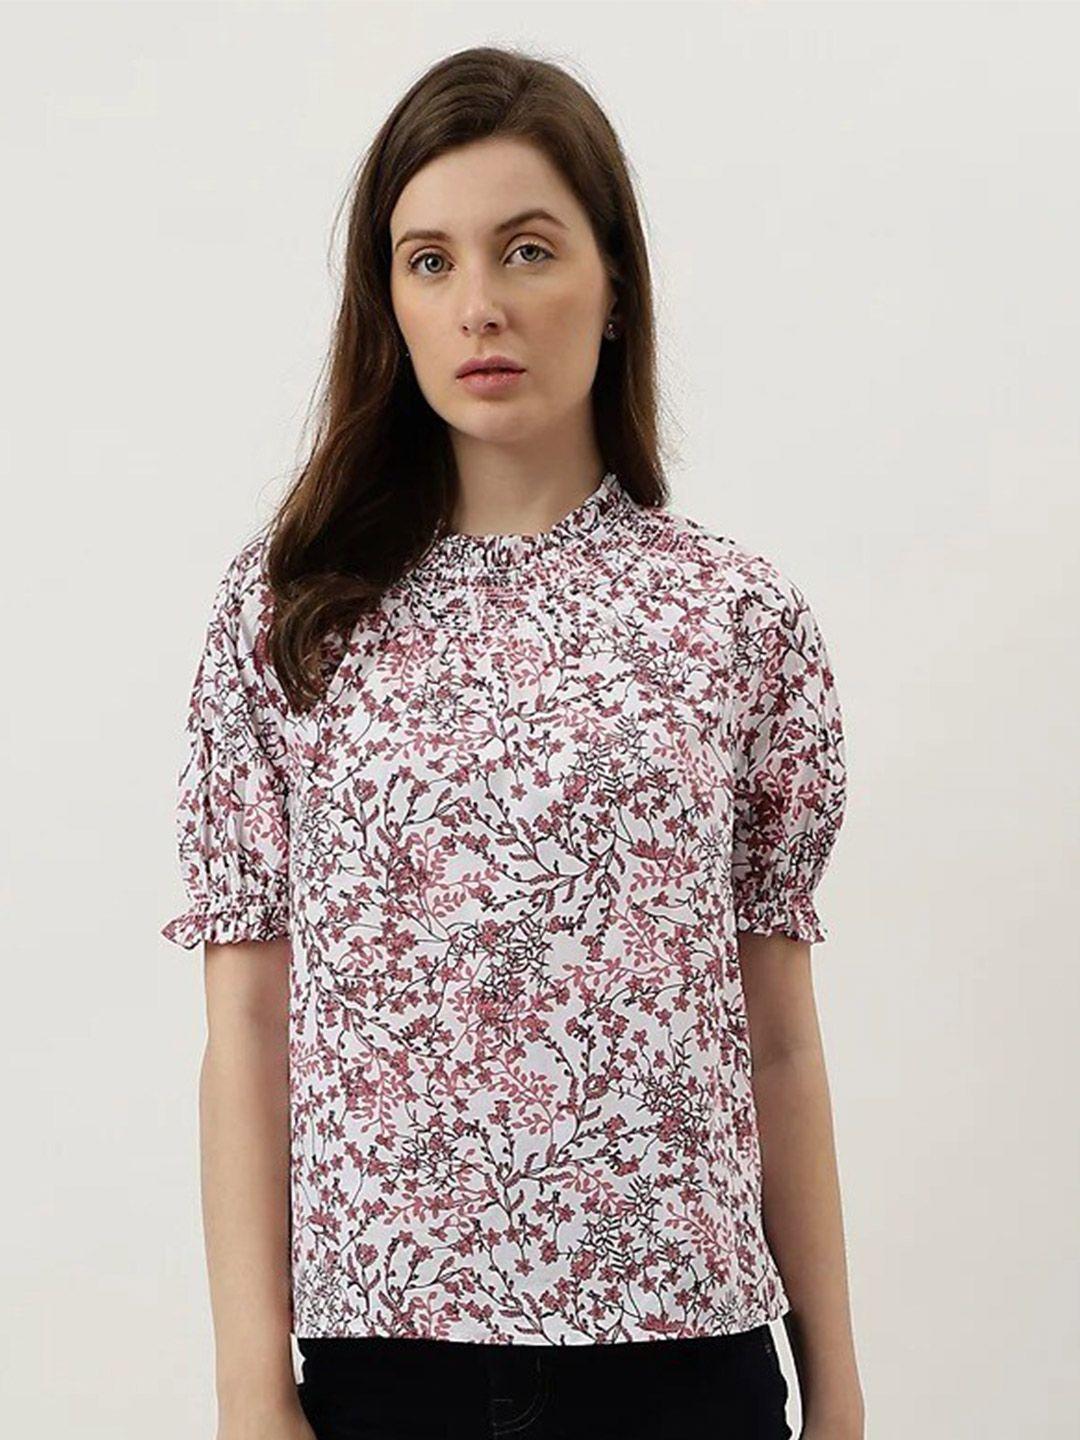 marks & spencer floral printed round neck short sleeves cotton top